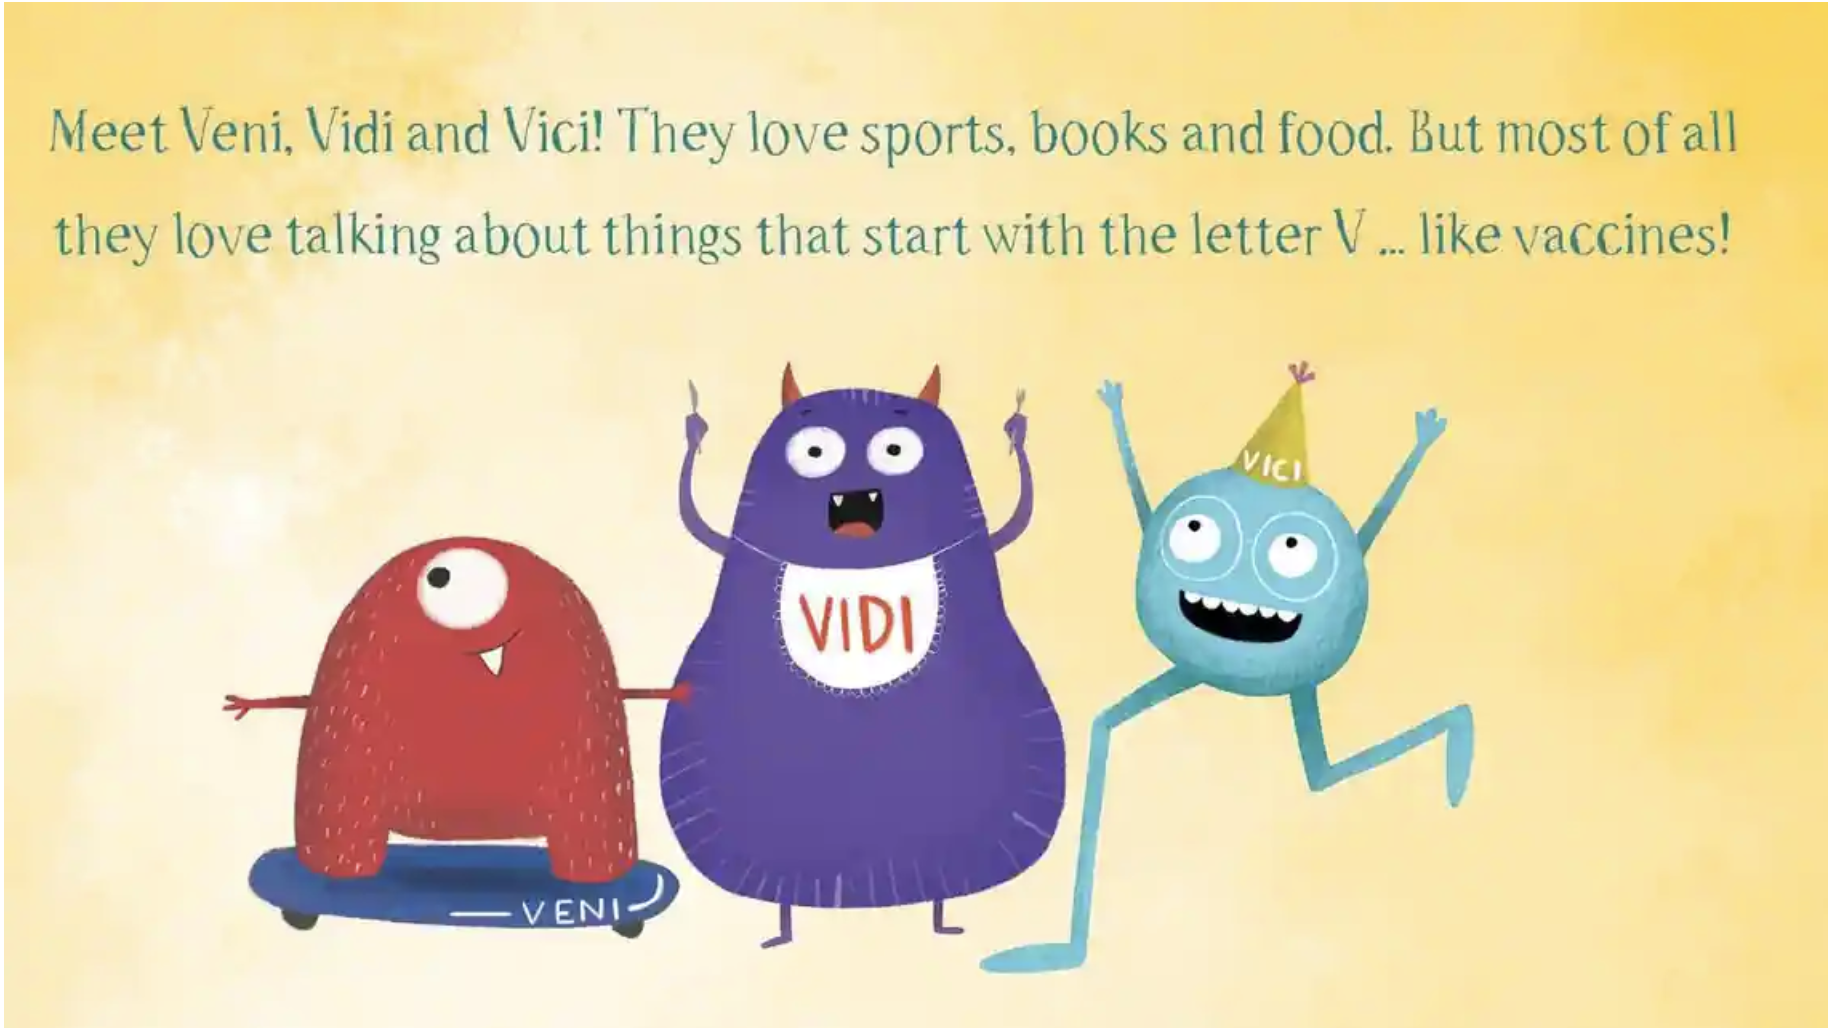 A quirky storybook about the A to Z of vaccines